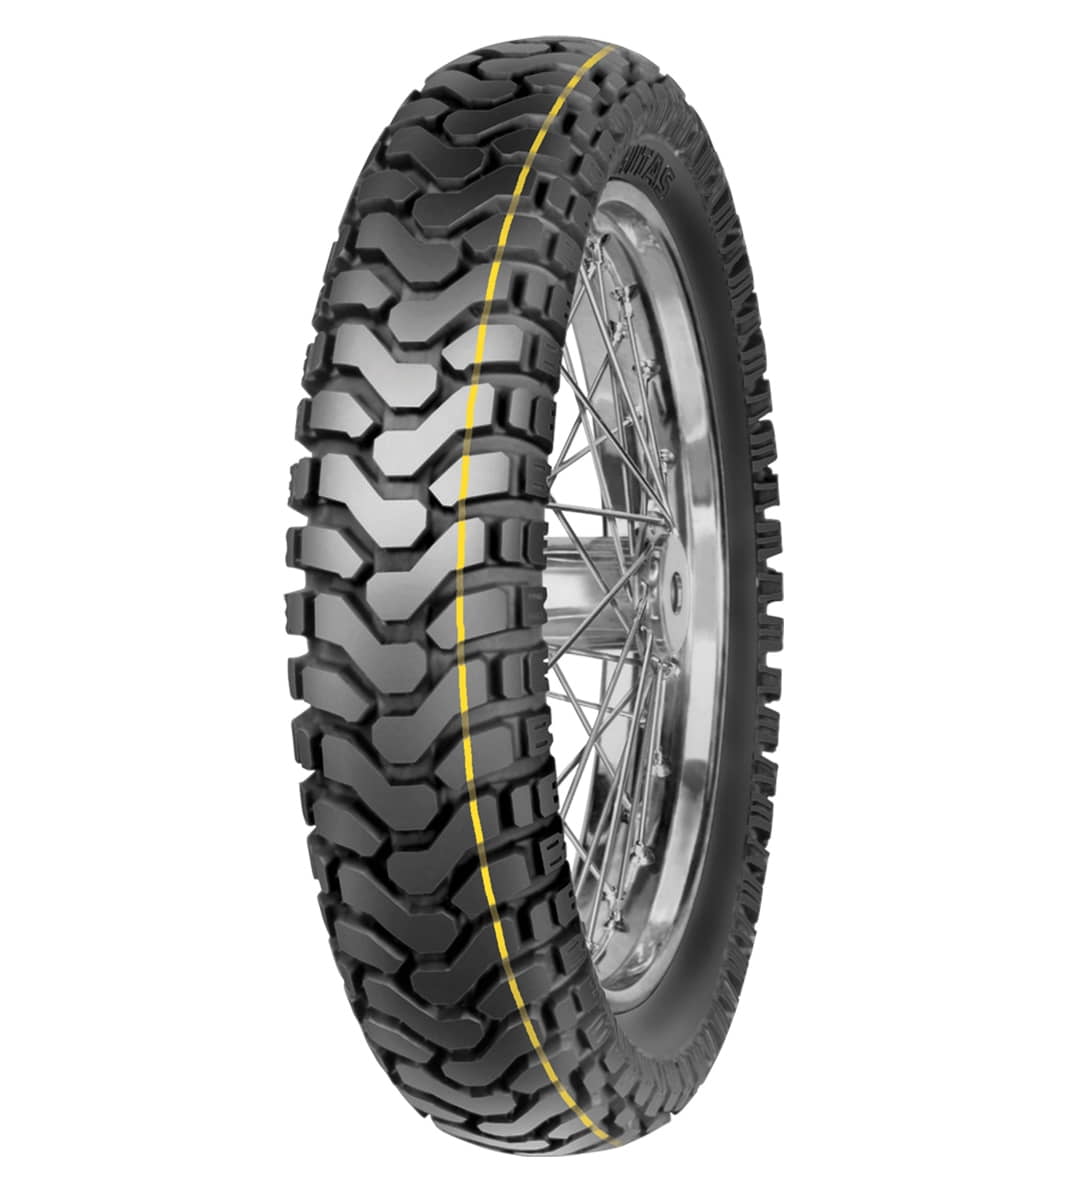 Mitas E-07 ENDURO 150/70-18 Trail OFF Trail DAKAR 70T Yellow Tubeless Rear Tire, 224405, 150/70-18, Adventure Touring, E Series, E-07 Enduro, Rear, Trail, Trail OFF, Tires - Imported and distributed in North &amp; South America by Lindeco Genuine Powersports - Premier Powersports Equipment and Accessories for Motorcycle Enthusiasts, Professional Riders and Dealers.